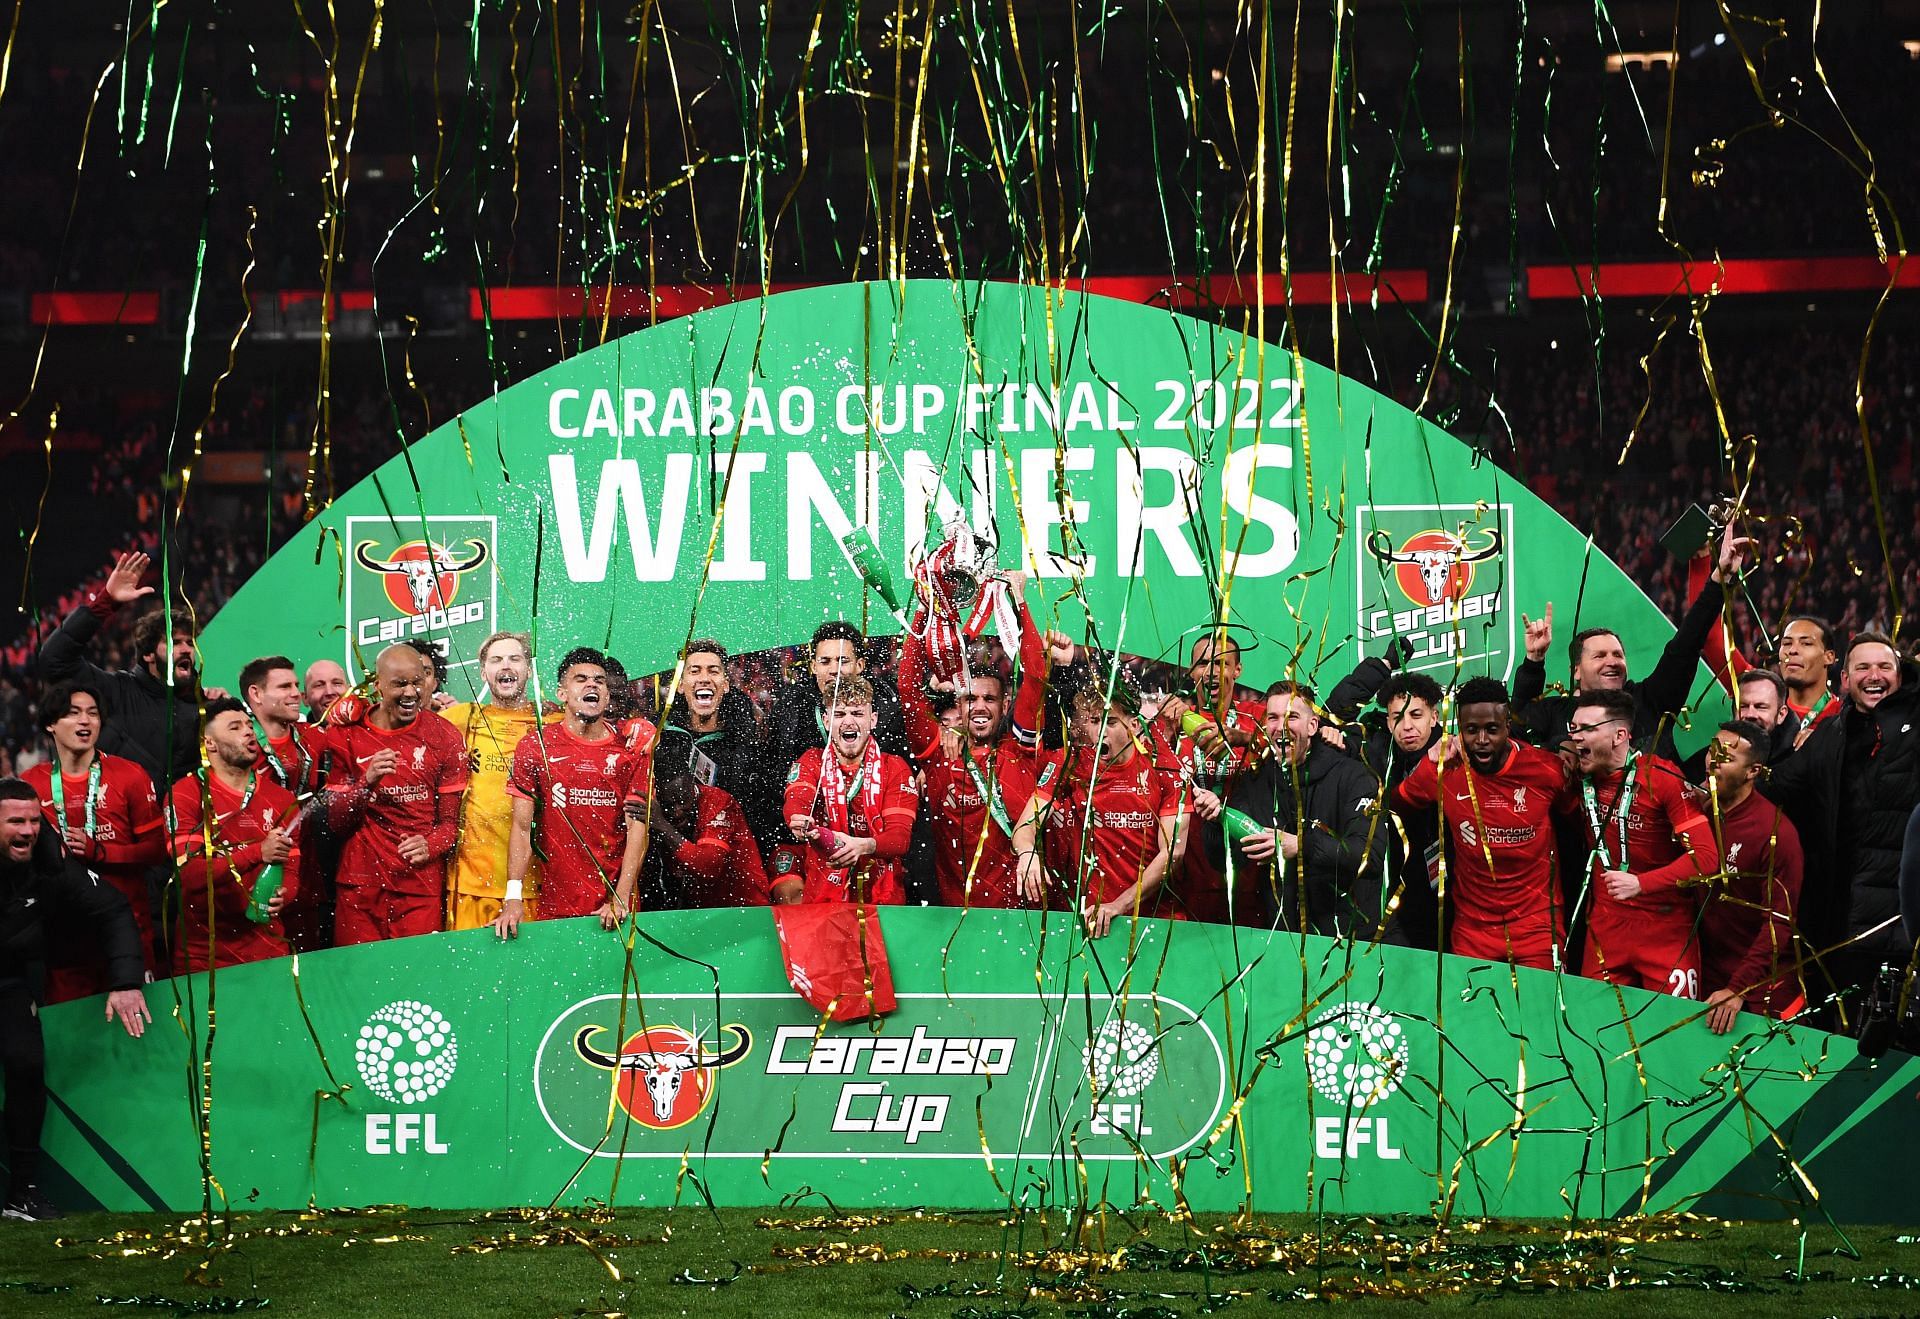 Liverpool players celebrate after winning the 2022 Carabao Cup Final.